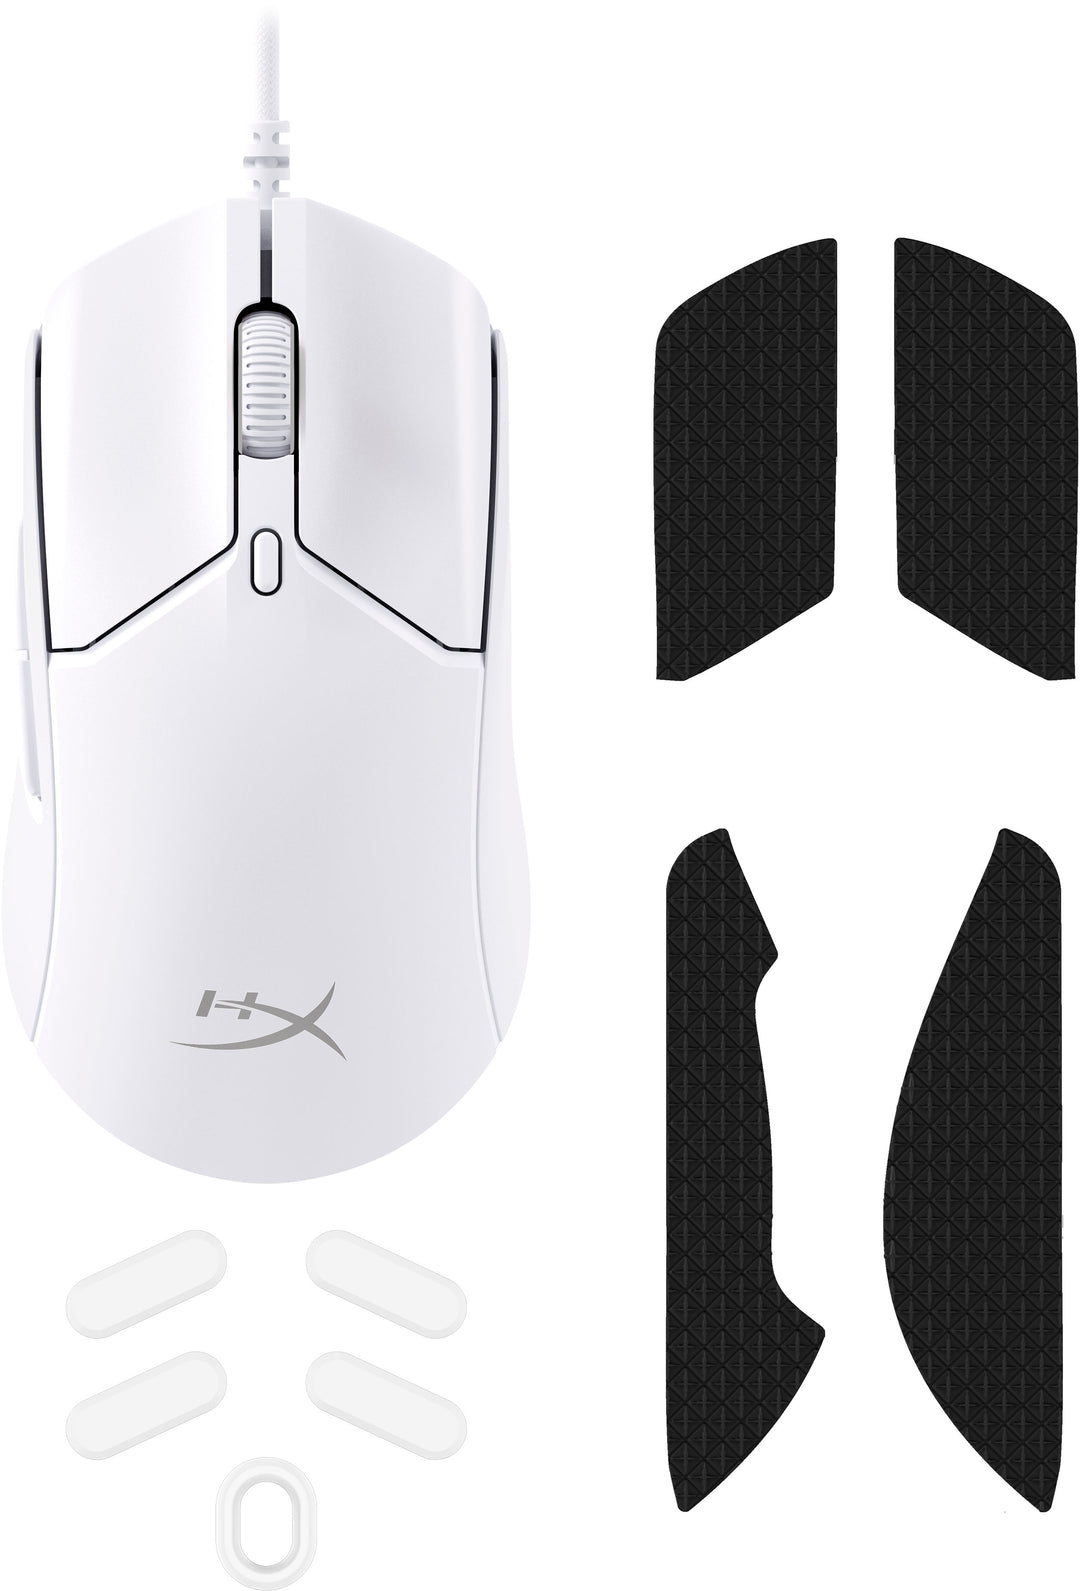 HyperX - Pulsefire Haste 2 Lightweight Wired Optical Gaming Mouse with RGB Lighting - White_5